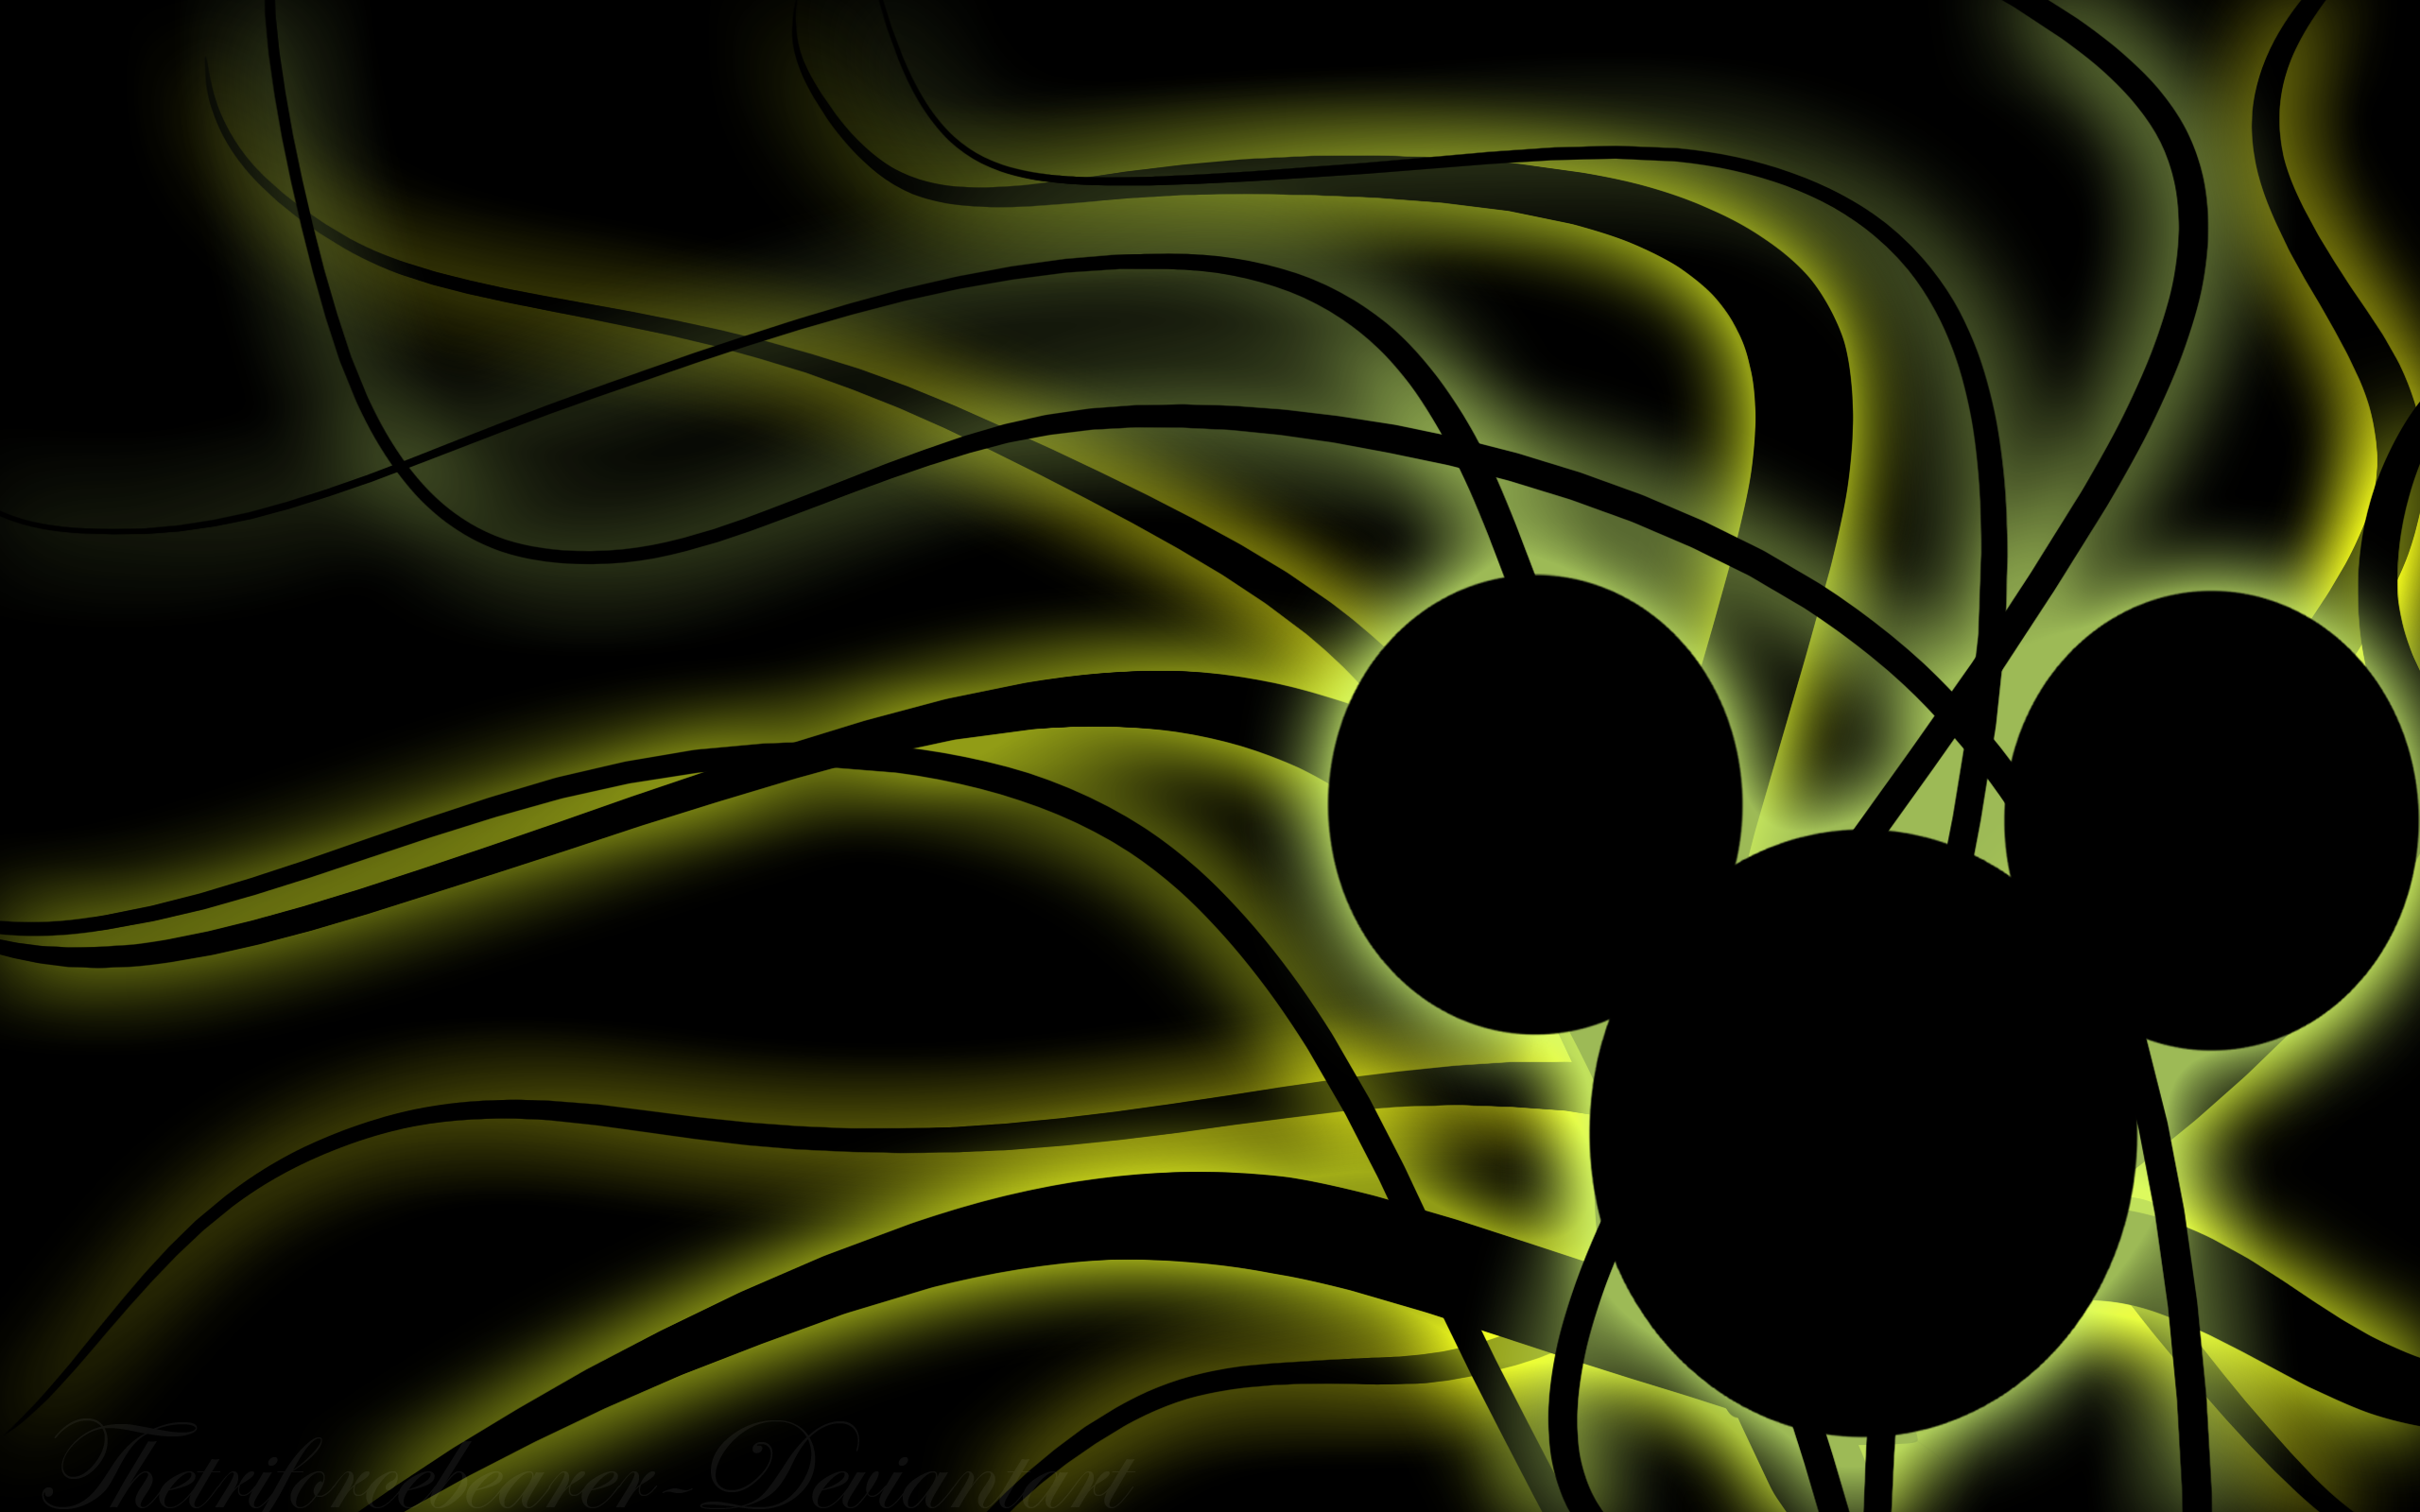 Mickey Mouse Wallpaper by thetriforcebearer on